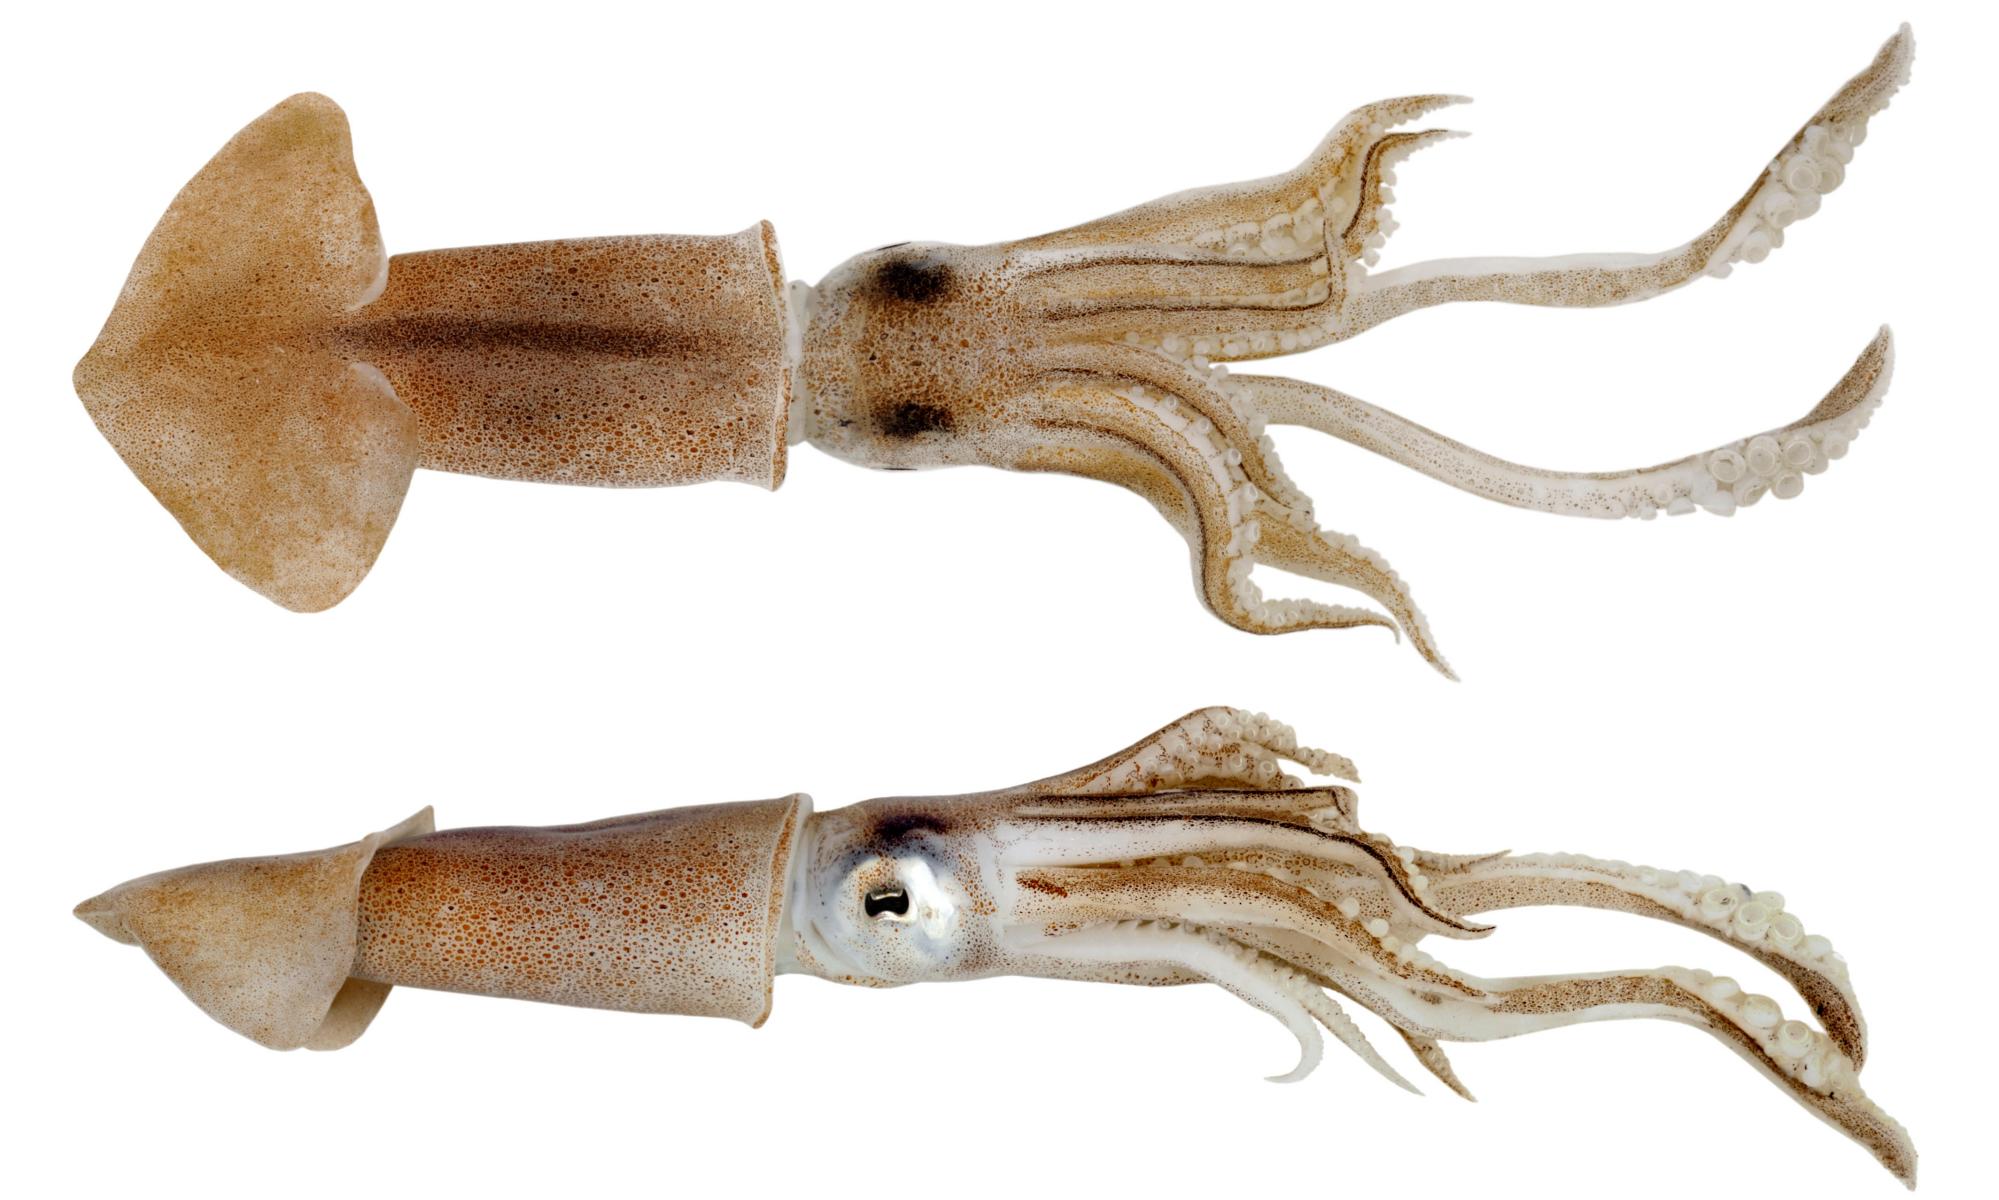 Specieswatch: why the squid game in UK needs new rules